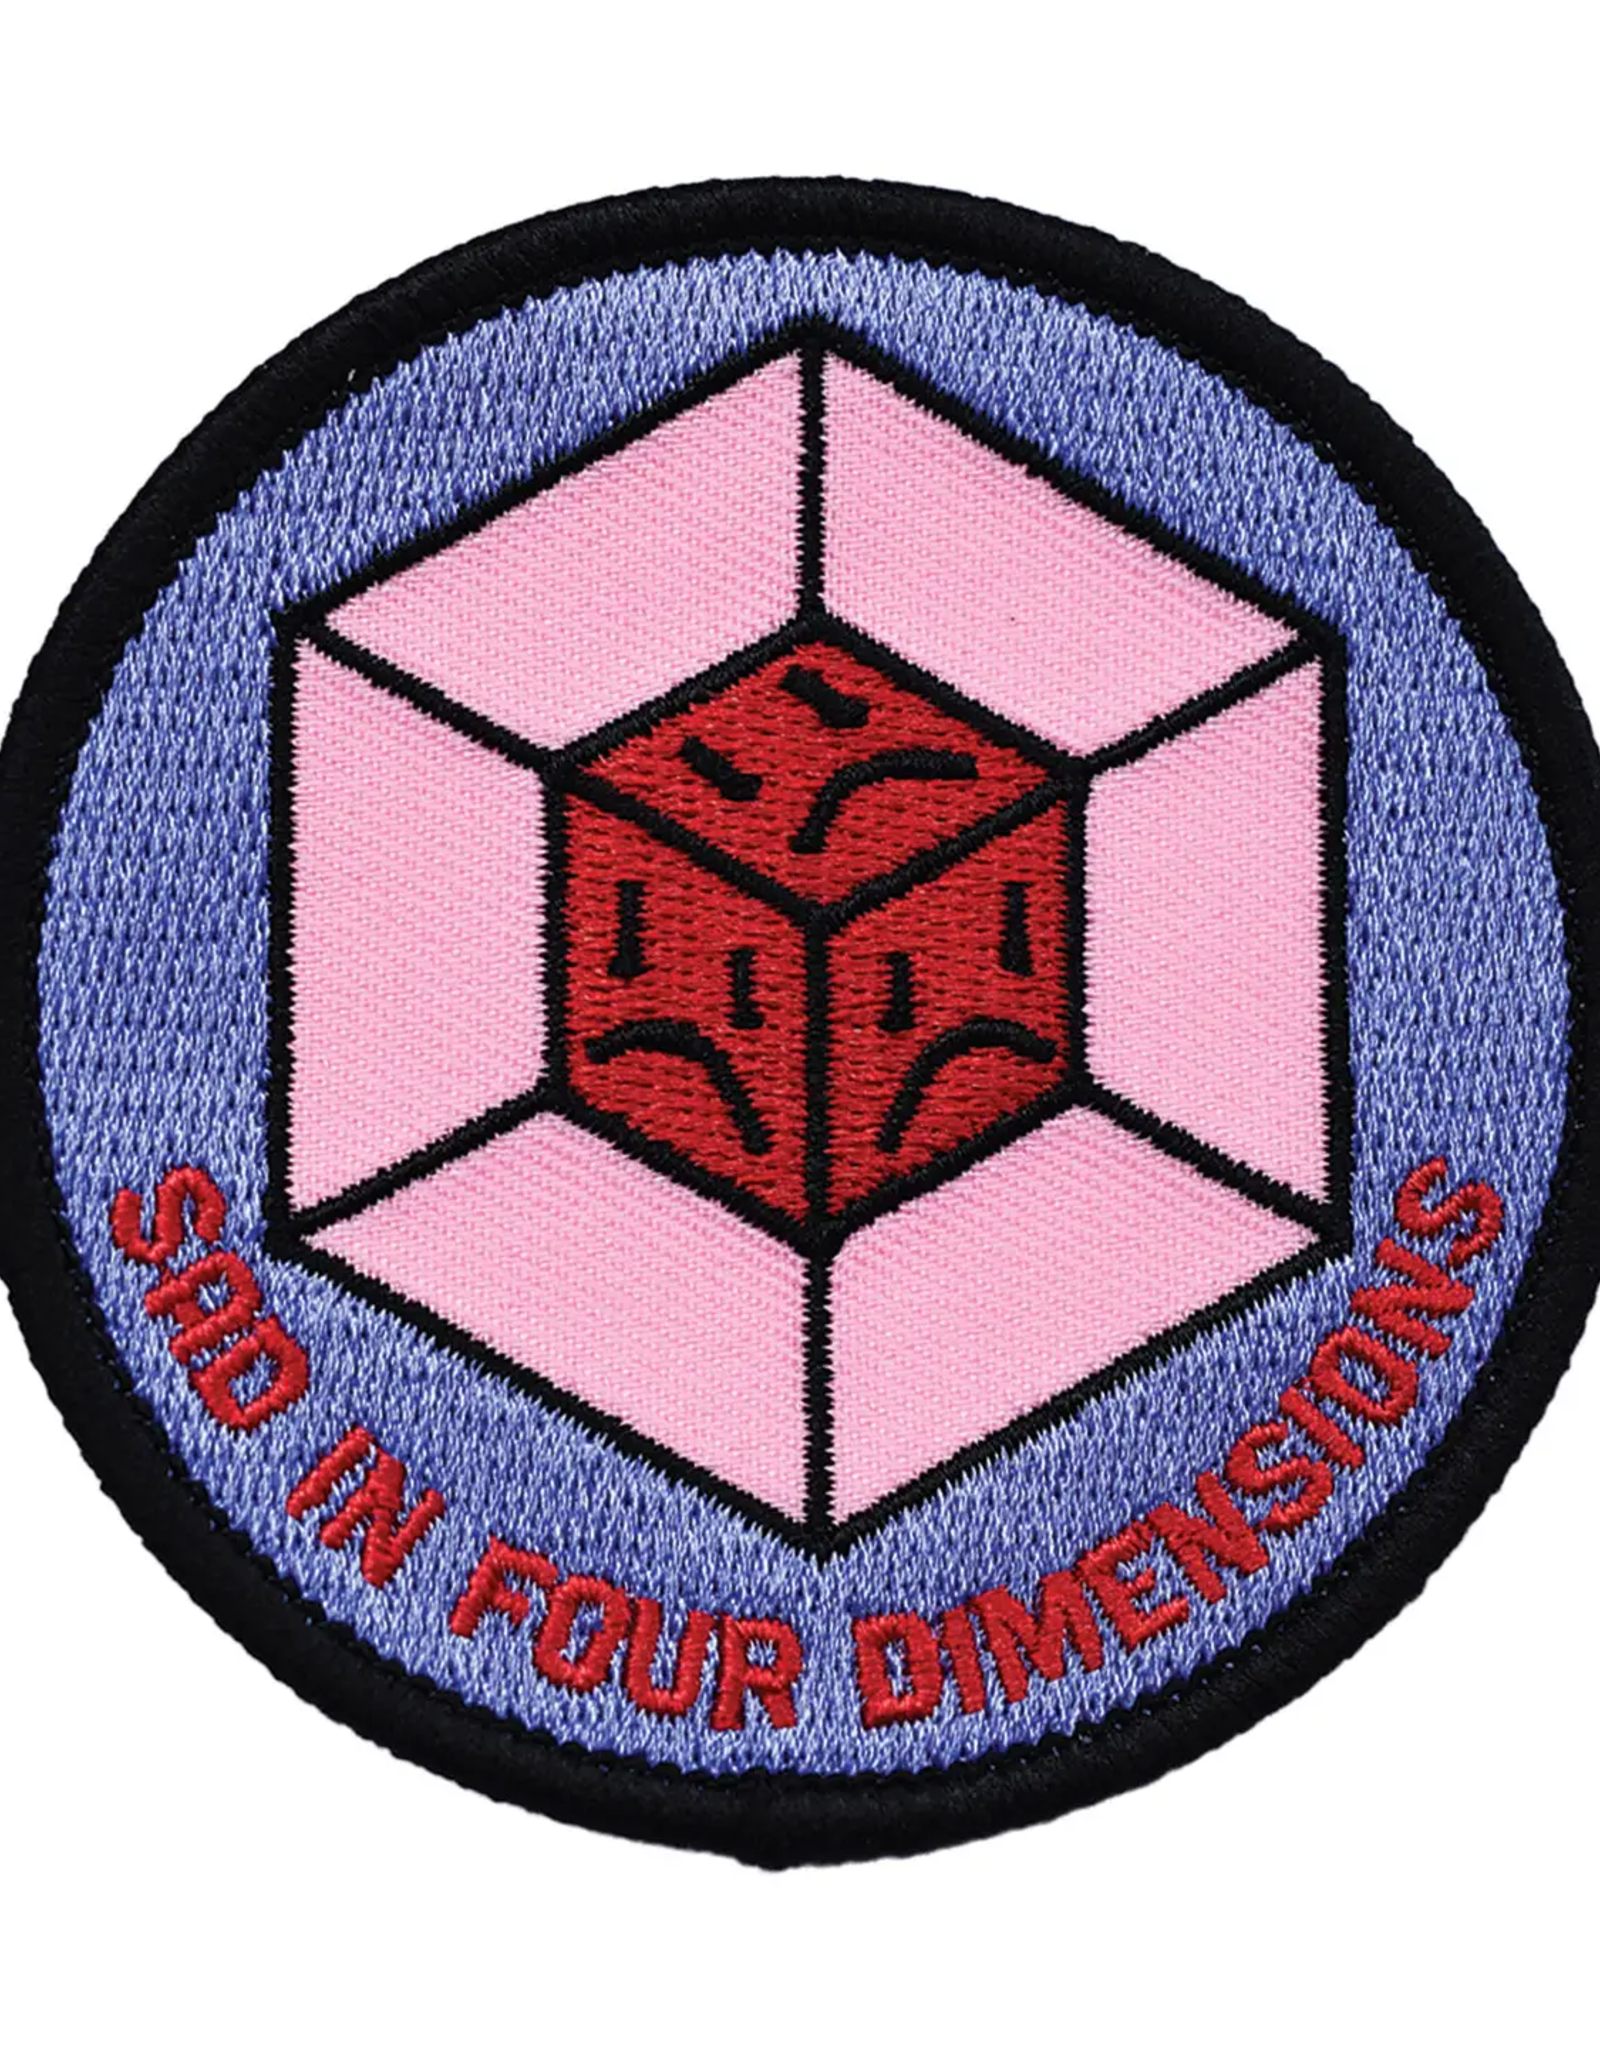 Sad in Four Dimensions Embroidered Patch